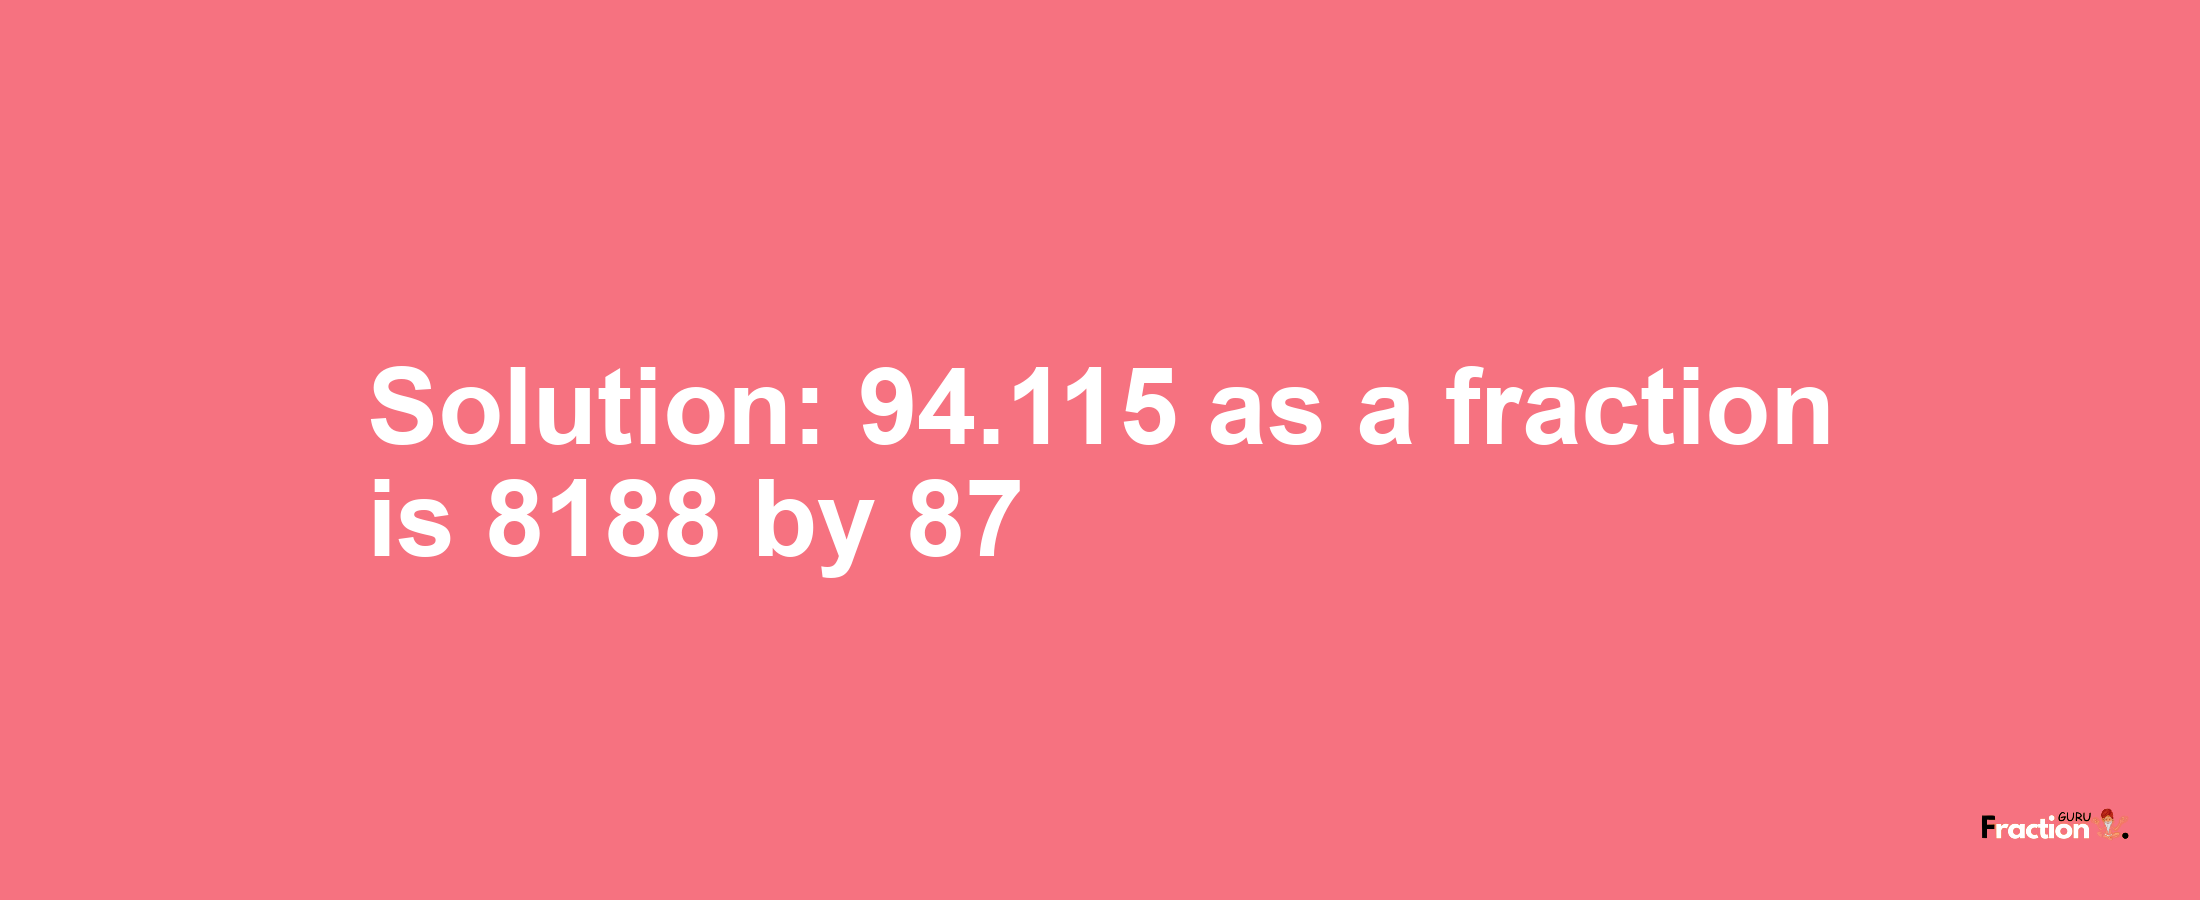 Solution:94.115 as a fraction is 8188/87